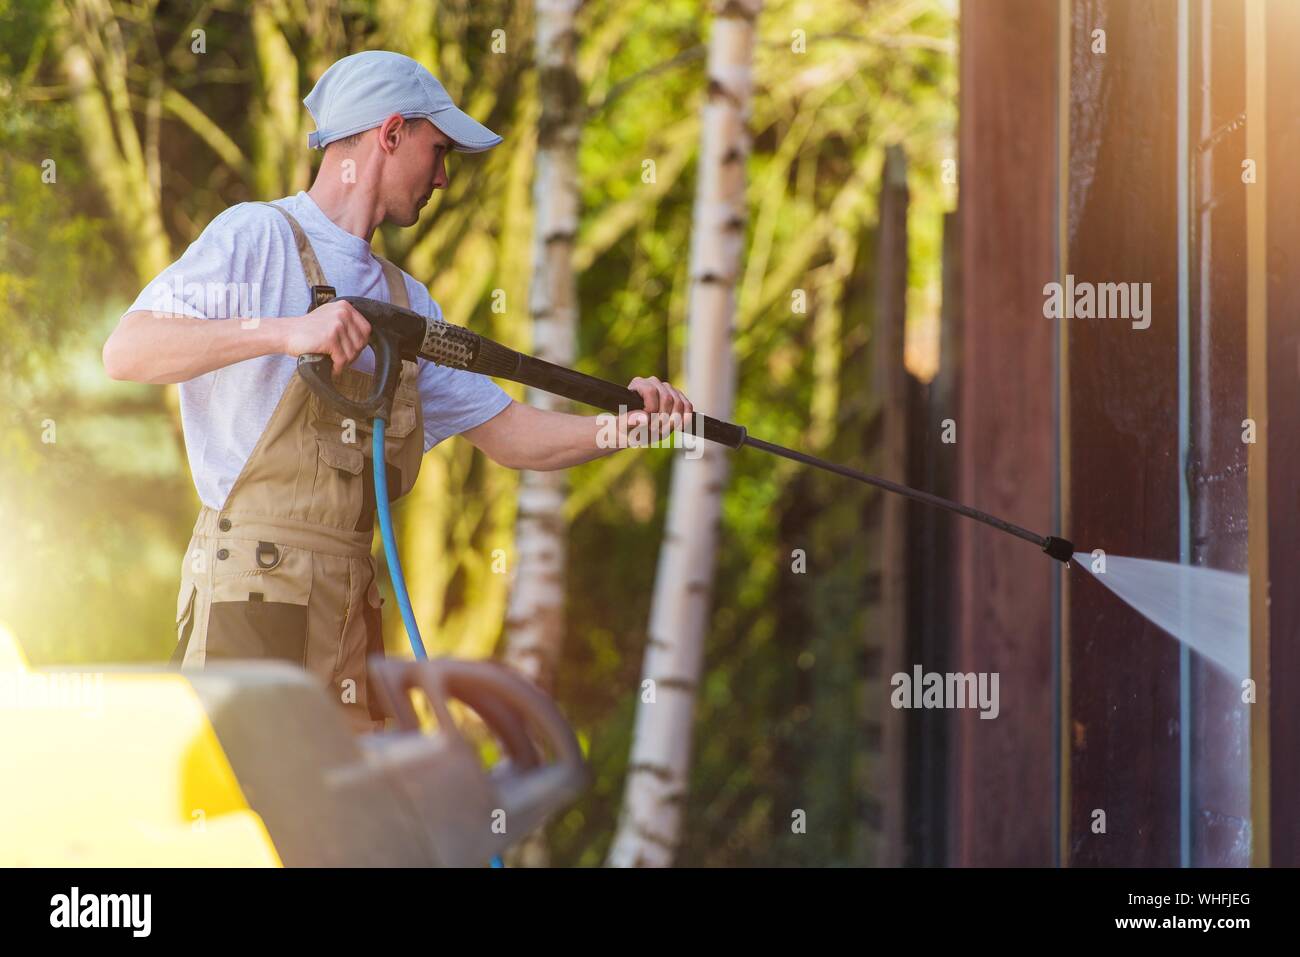 Mid Adult Man Spraying Water In Greenhouse Stock Photo